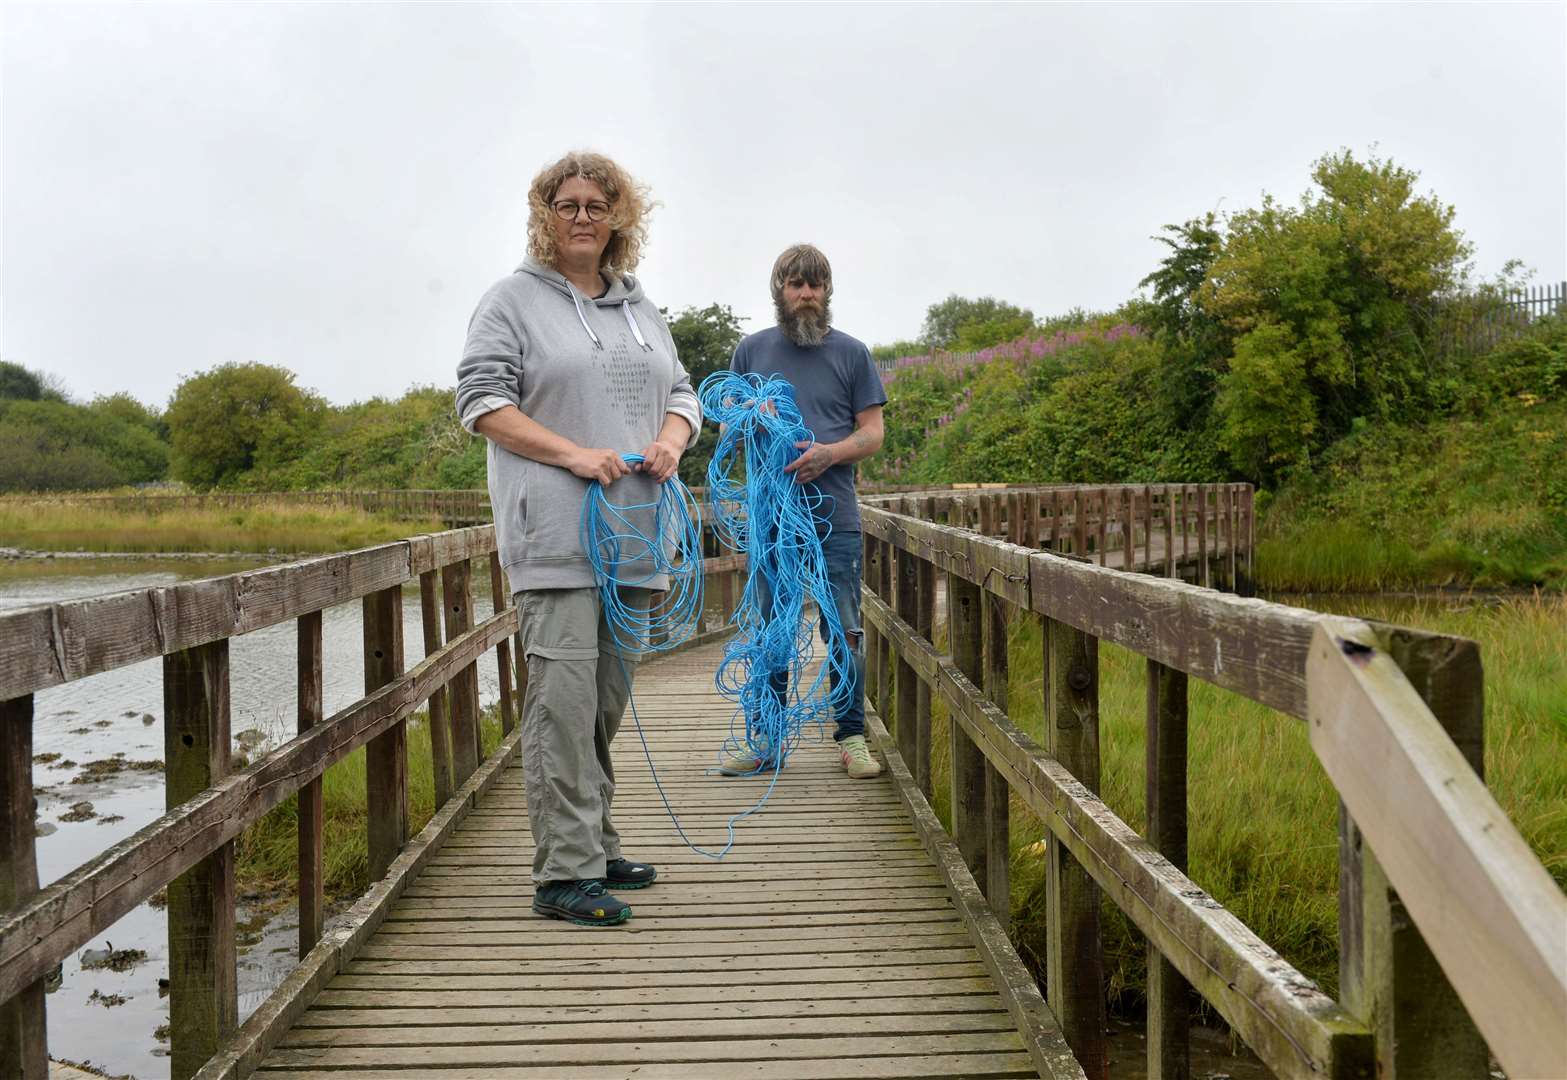 Caroline Snow, project manager at Merkinch Local Nature Reserve and Joe Simpson prepare to close off the boardwalk.